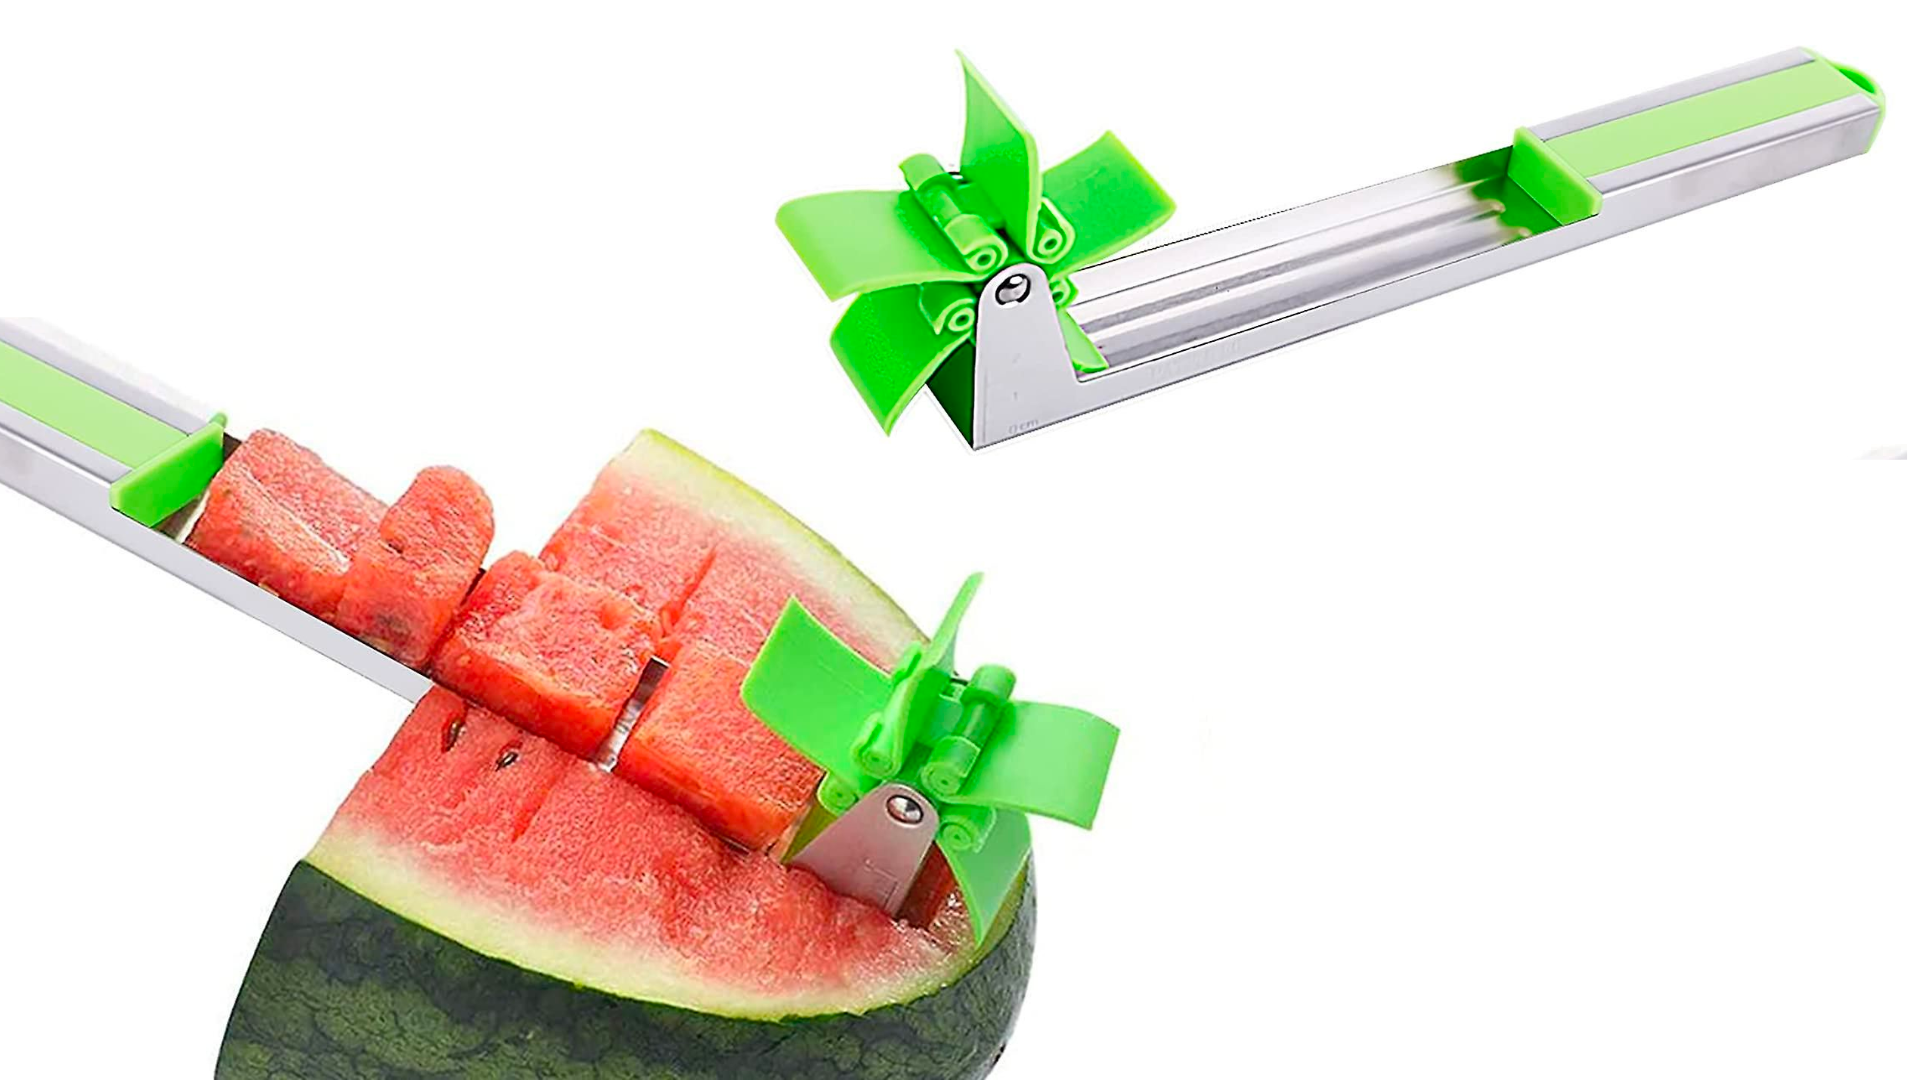 Watermelon windmill device cutting into a watermelon half, creating many small watermelon cubes.